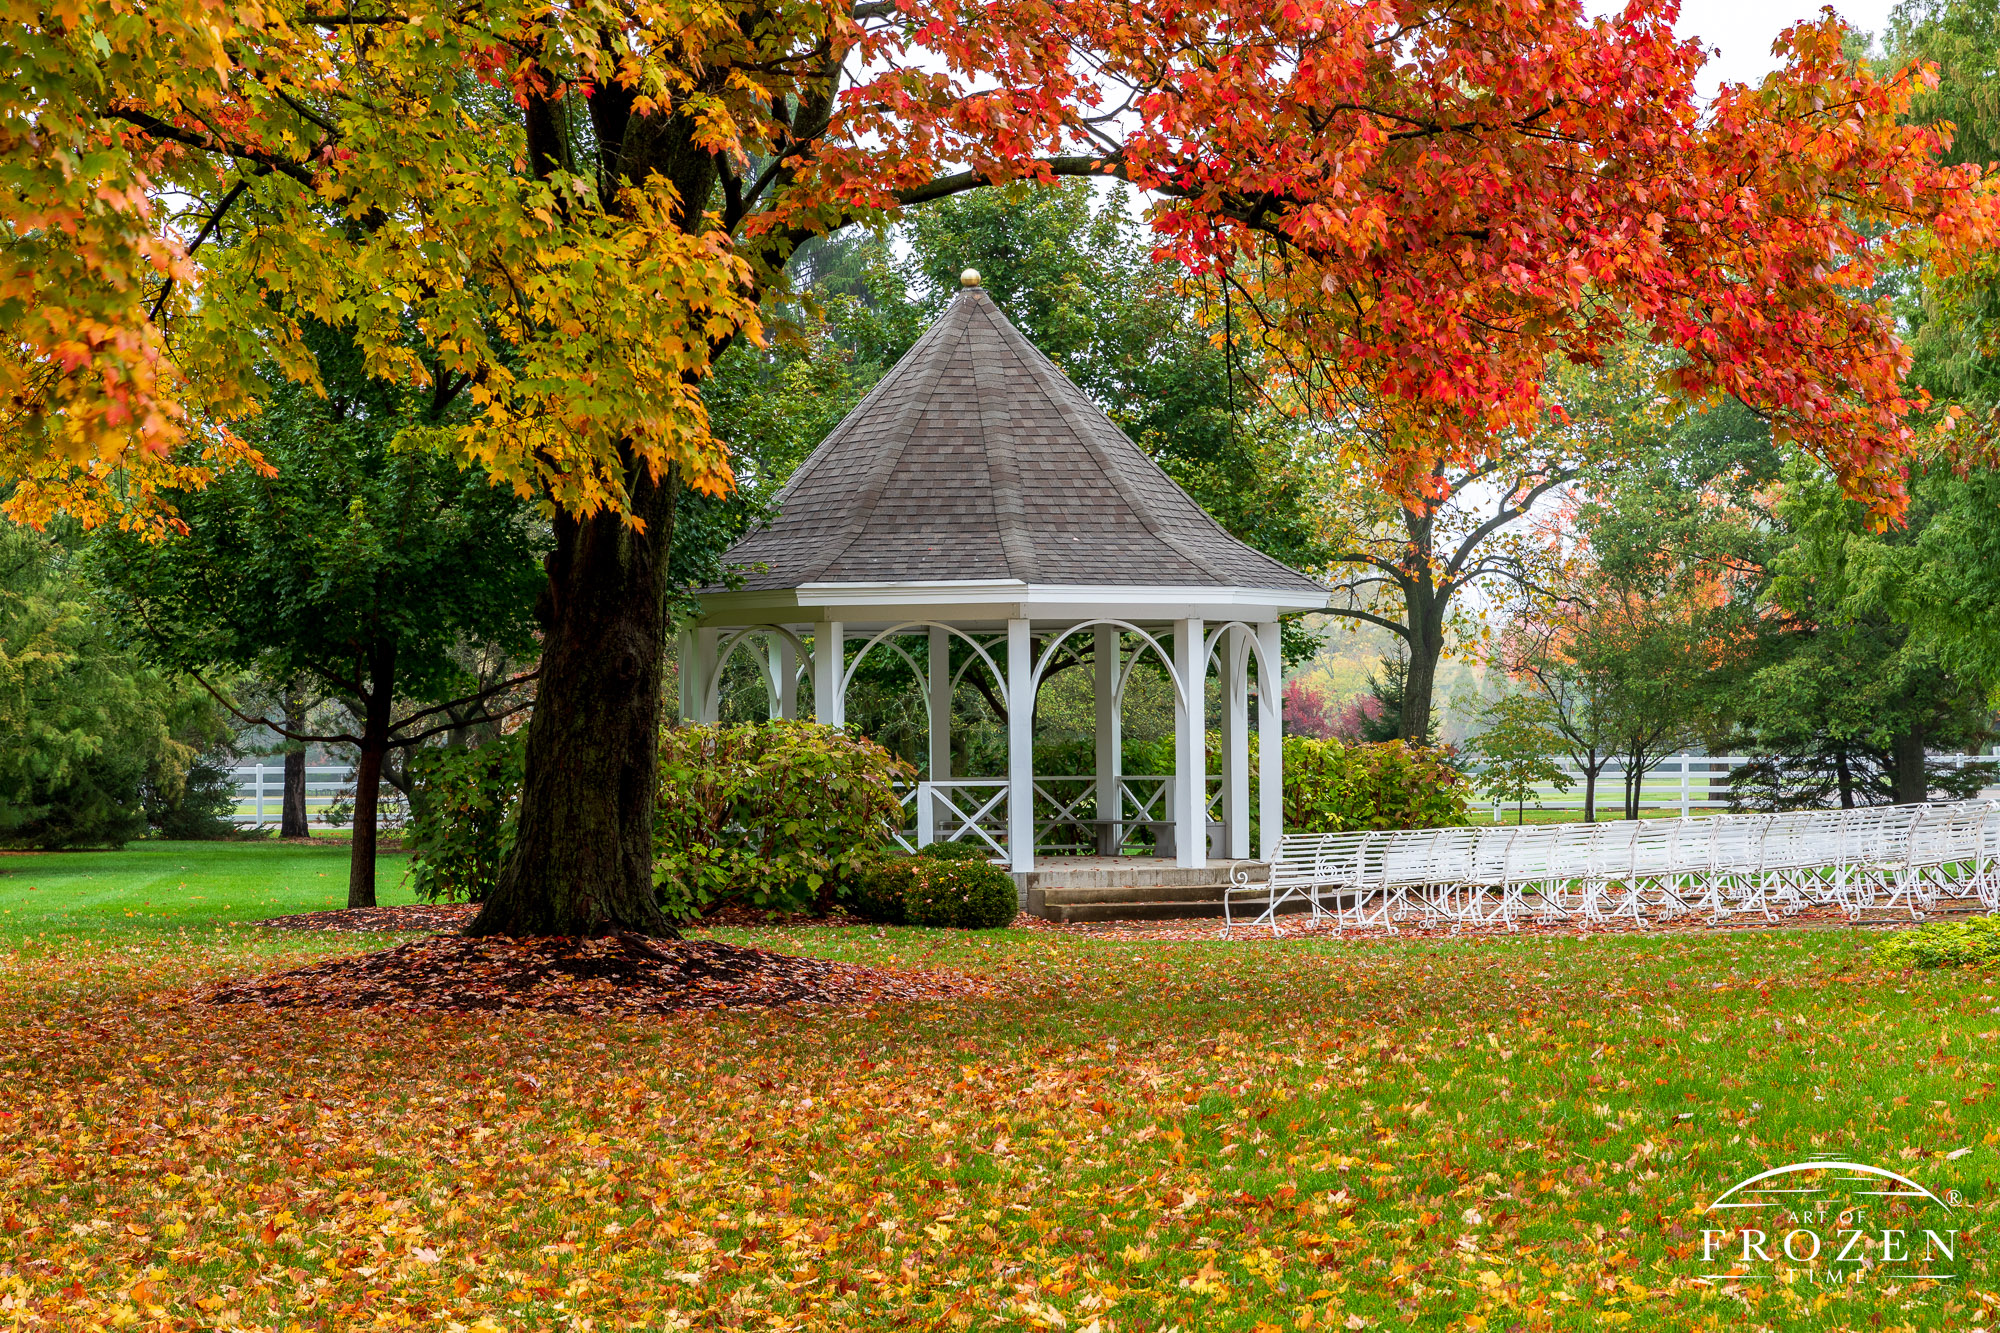 A rainy autumn evening where a large colorful maple tree frames a white gazebo and its benches lined up for the next celebration